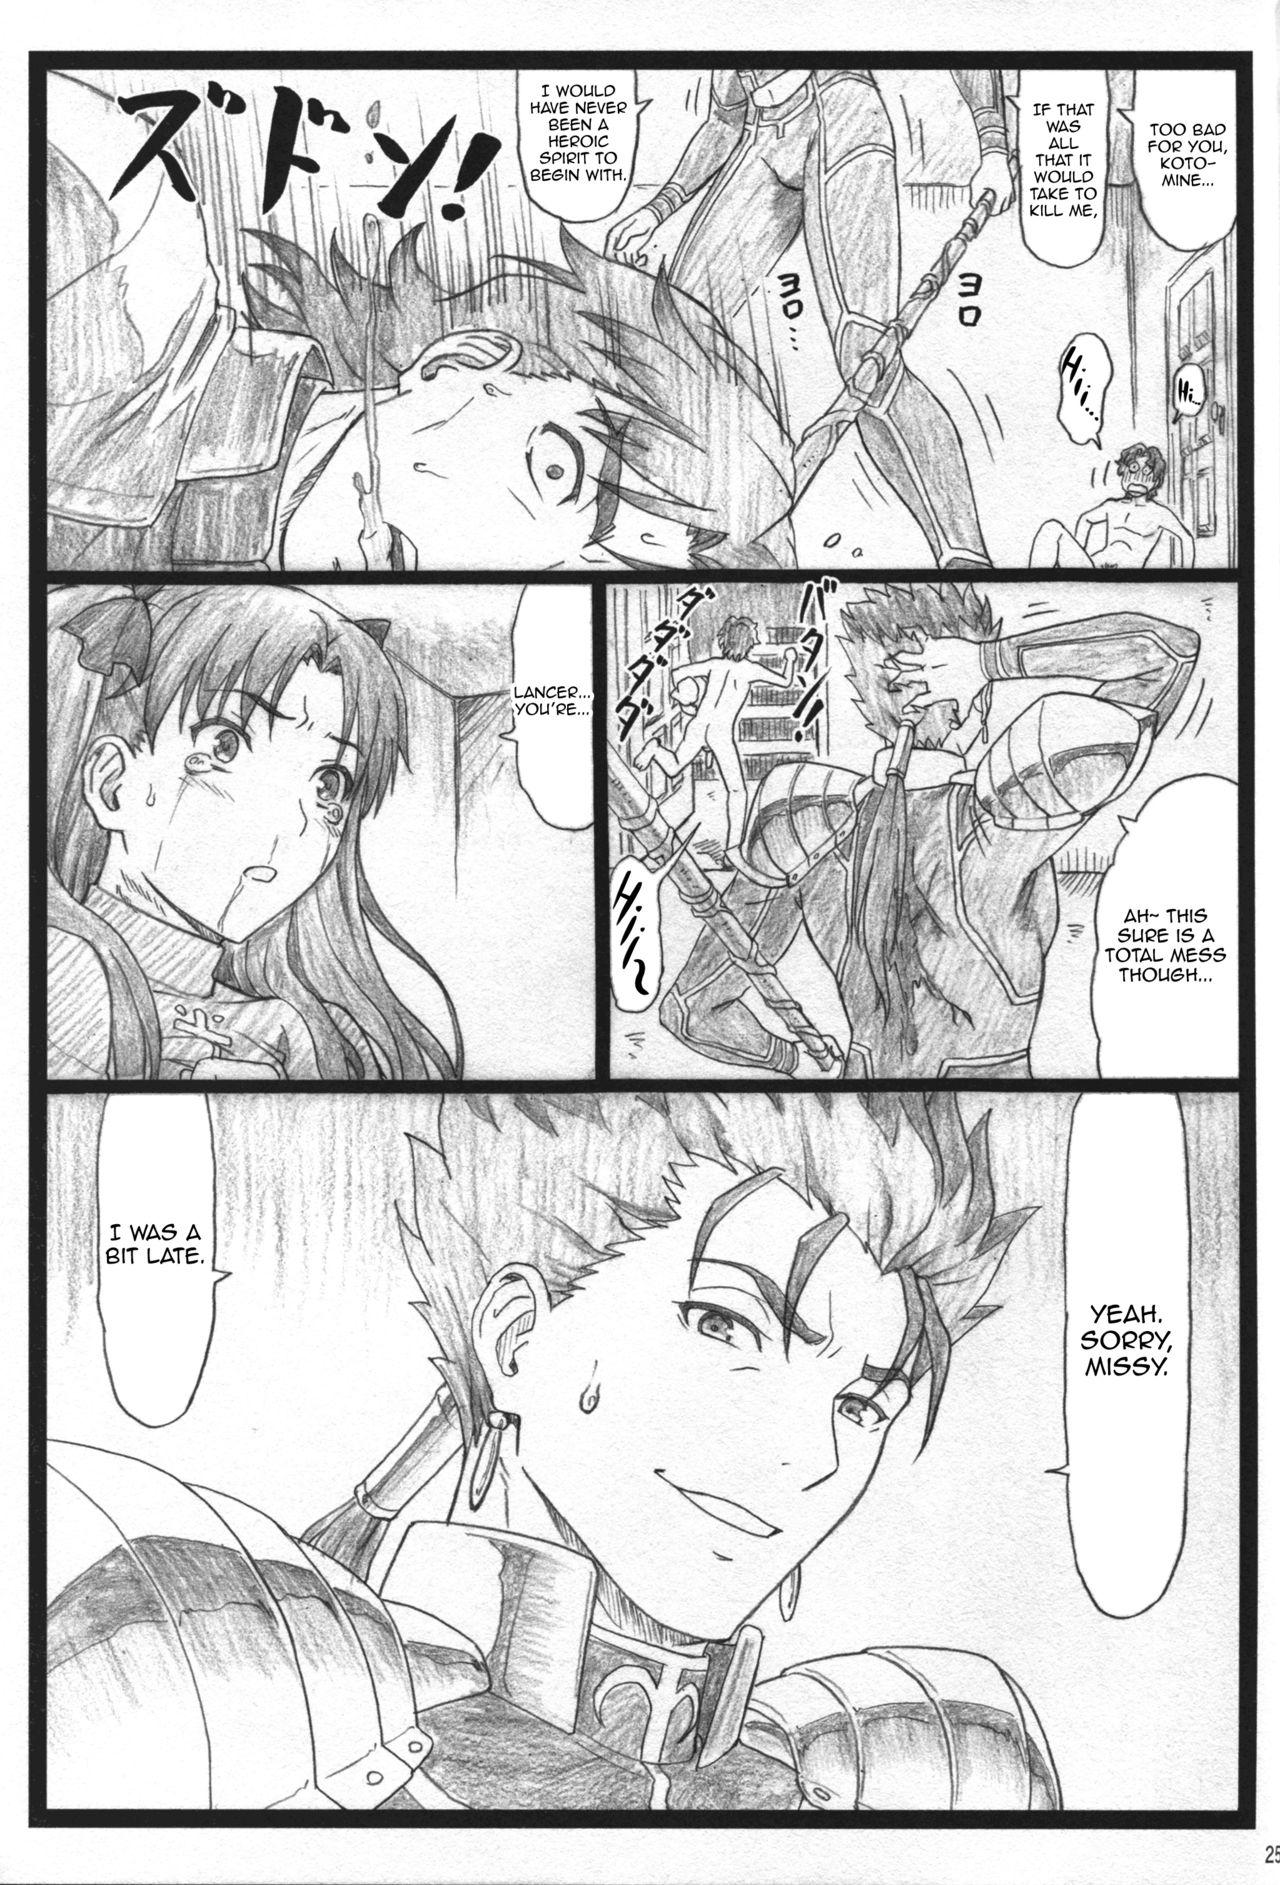 Mistress Rin to Shite... | With Rin... - Fate stay night Suckingcock - Page 25